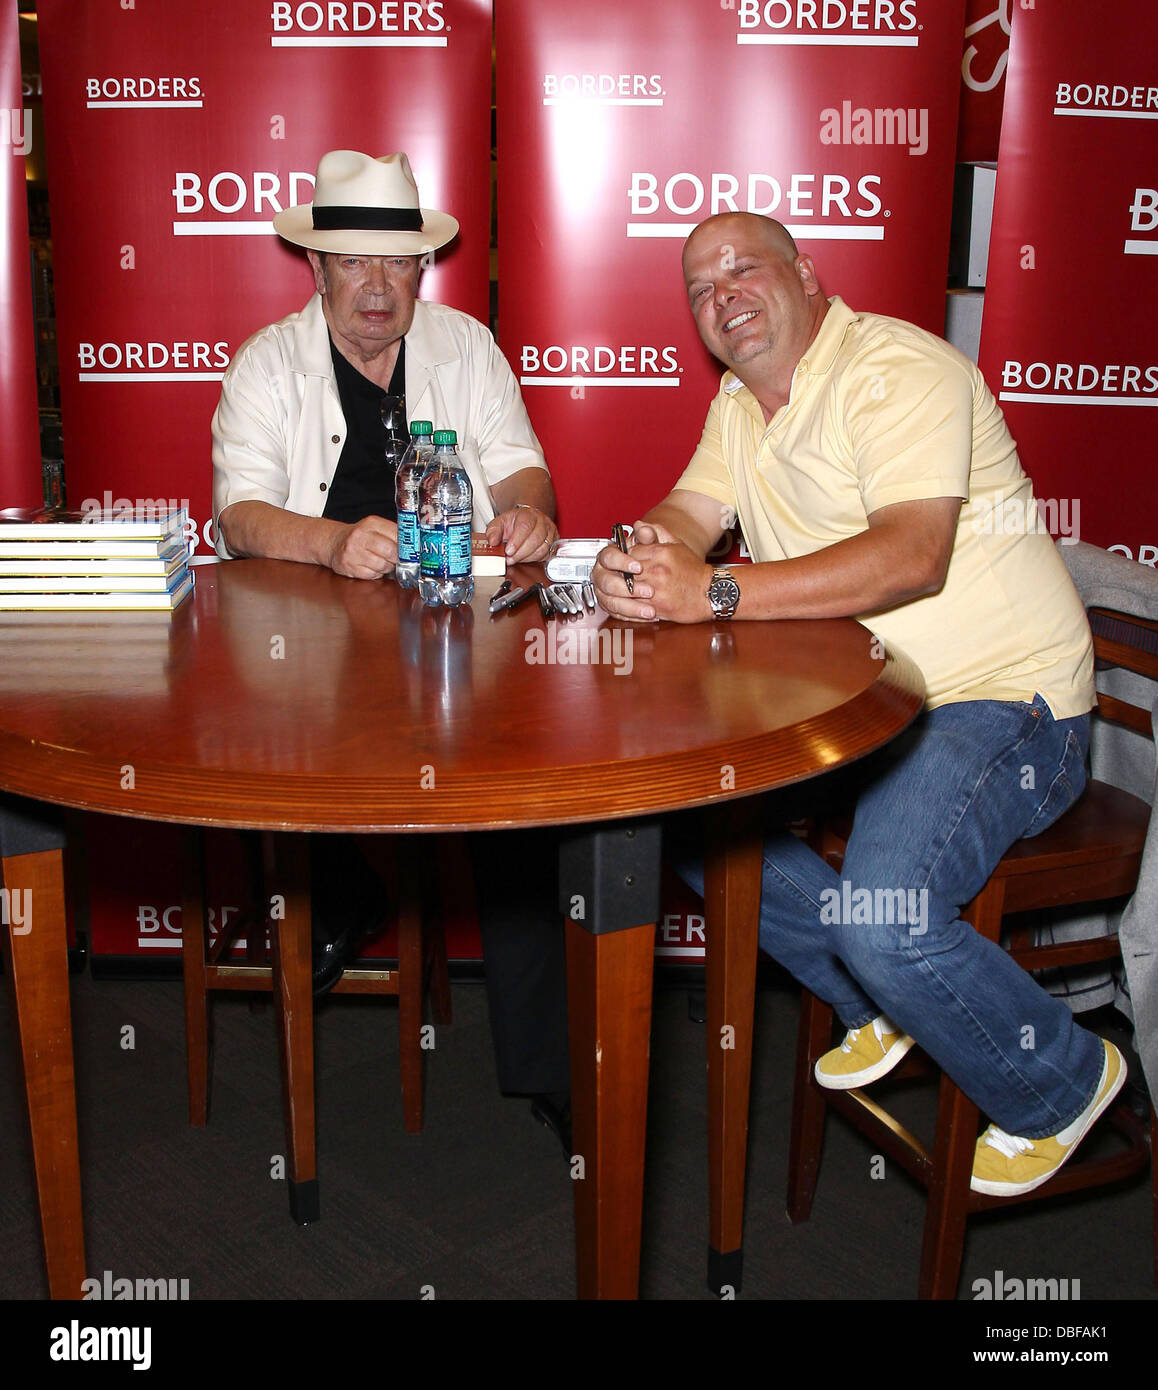 Richard 'The Old Man' Harrison and Rick Harrison Rick Harrison of Pawn Stars signs copies of his new book, 'License to Pawn' at the Town Square Borders Books Las Vegas, Nevada - 10.06.11 Stock Photo